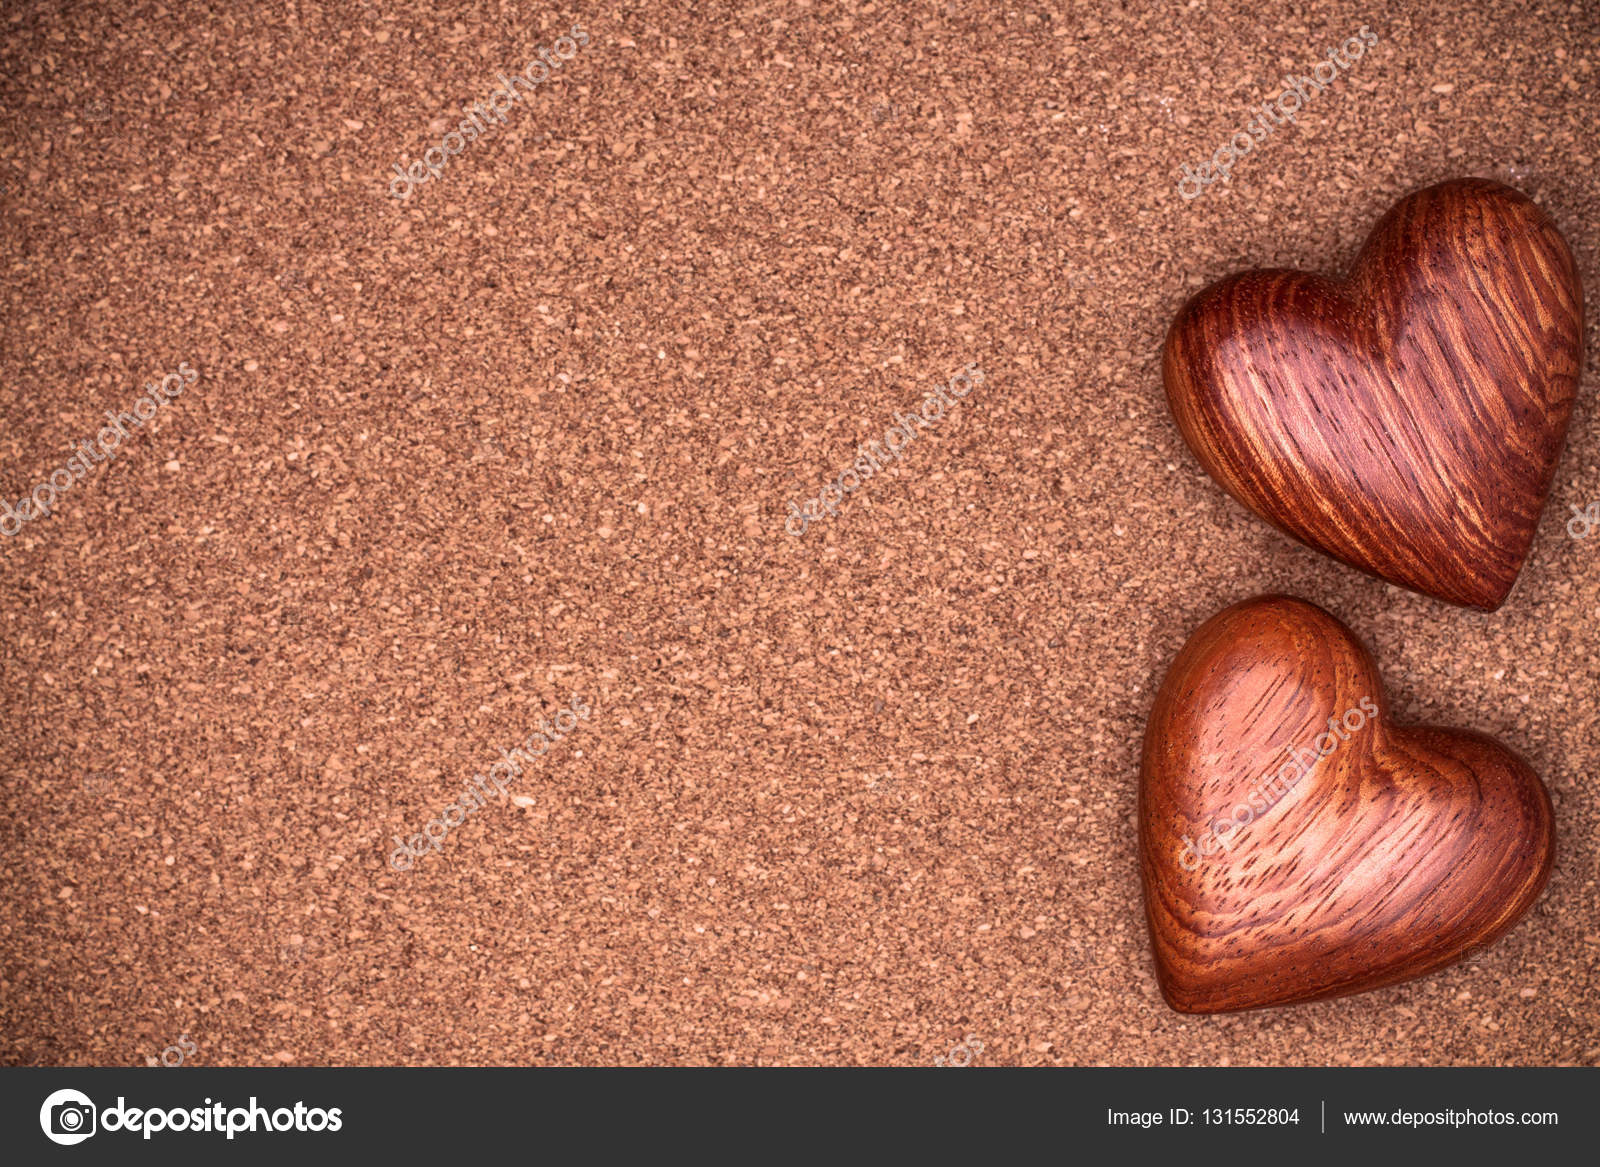 Two Wooden Hearts On Rustic Wood Background. Valentines Days